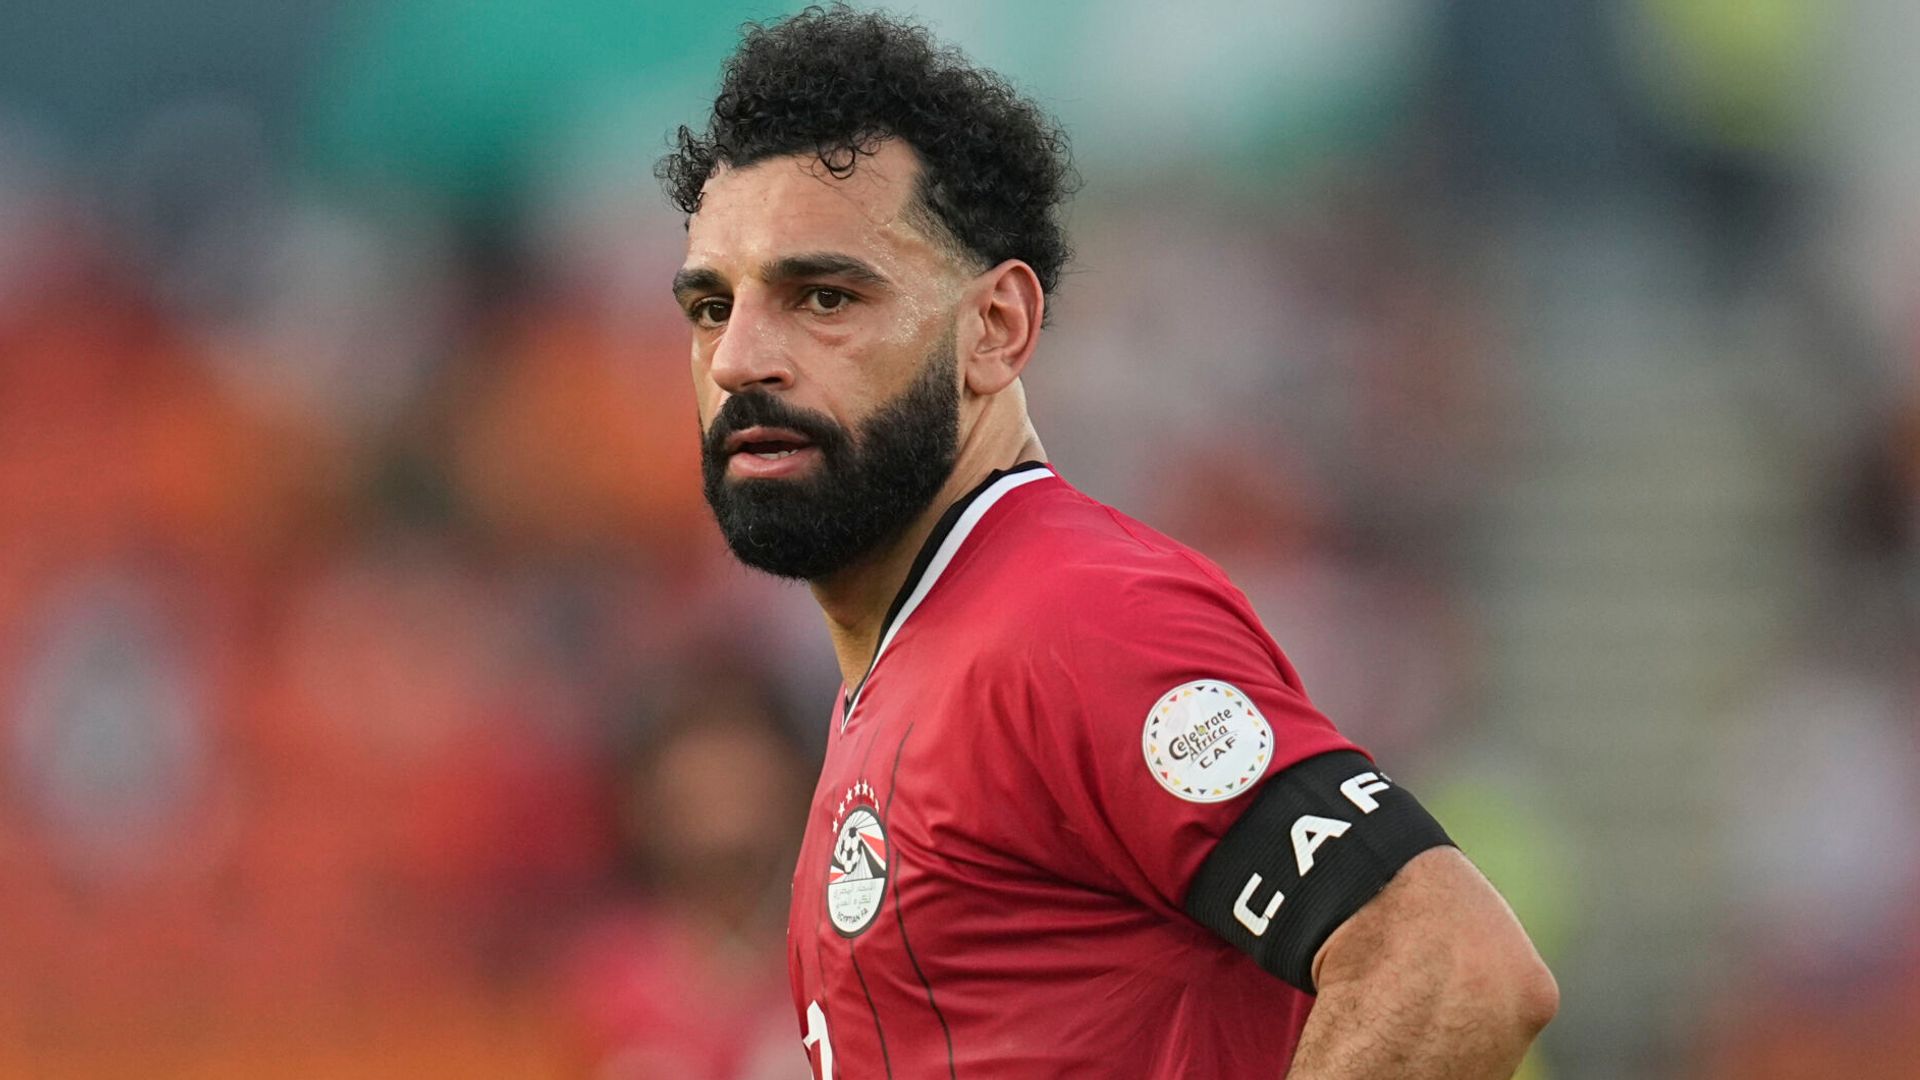 Salah to return to Liverpool from AFCON after suffering injury